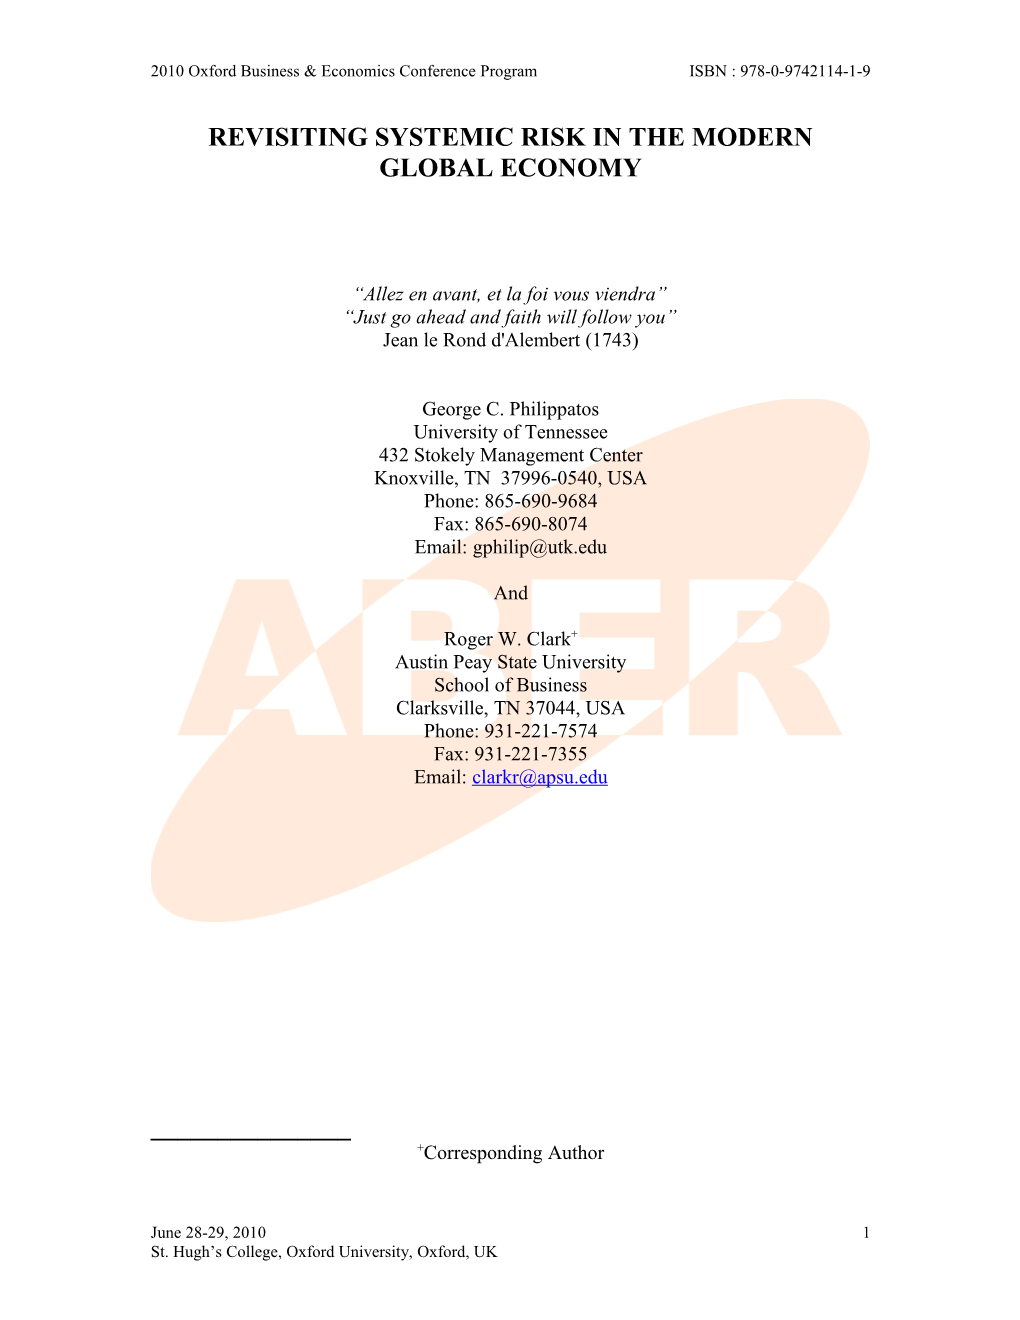 Revisiting Systemic Risk in the Modern Global Economy